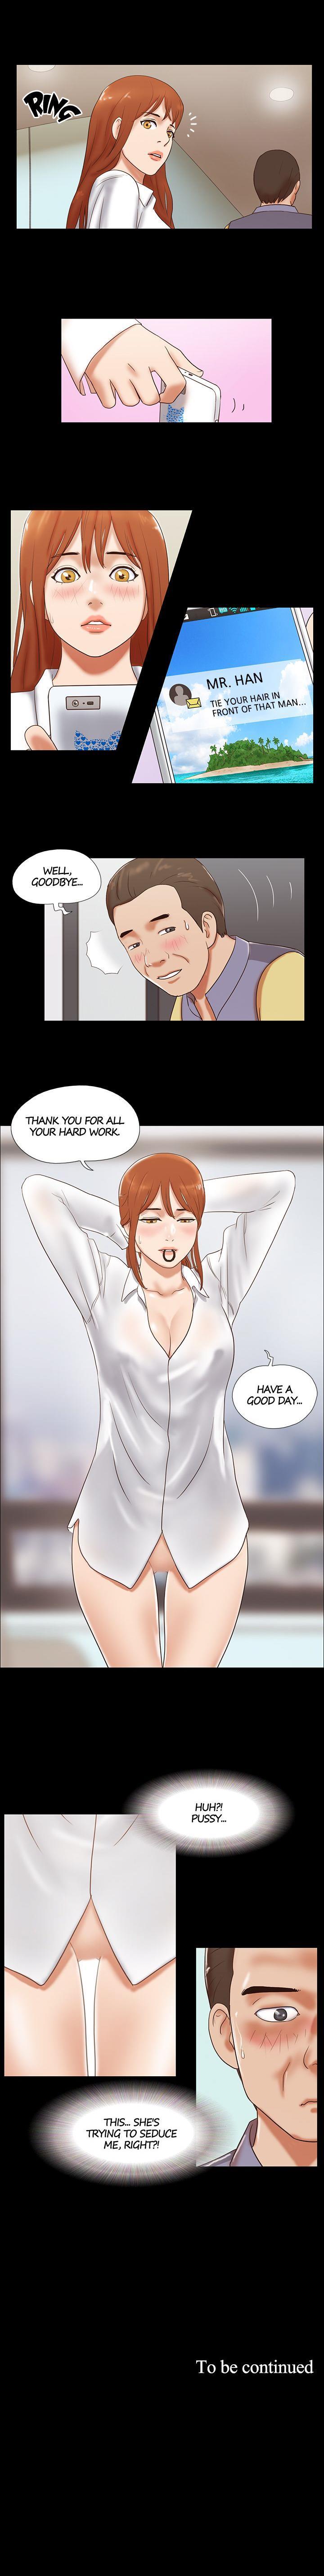 [Mulduck] Couple Game: 17 Sex Fantasies Ver.2 - Ch.41 - 63 END [English] 69